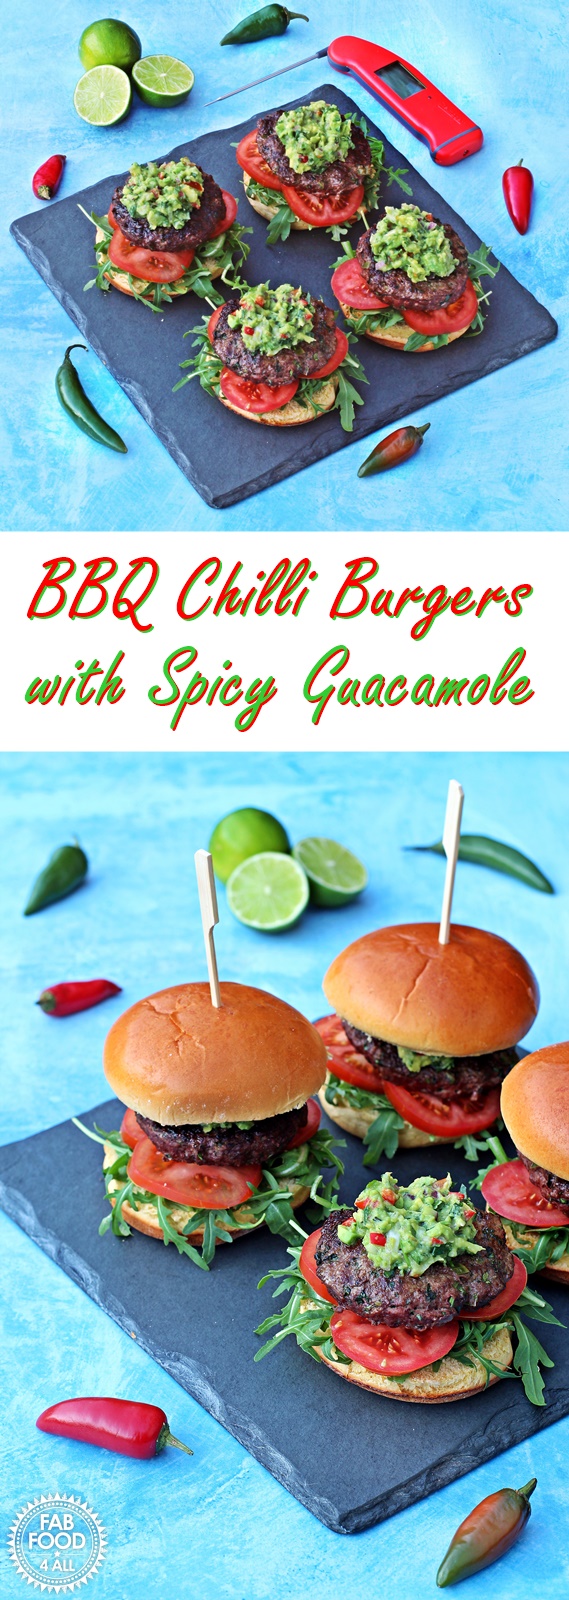 BBQ Chilli Burgers with Spicy Guacamole - Fab Food 4 All #beef #bbq #barbecue #grilling #burger #guacamole